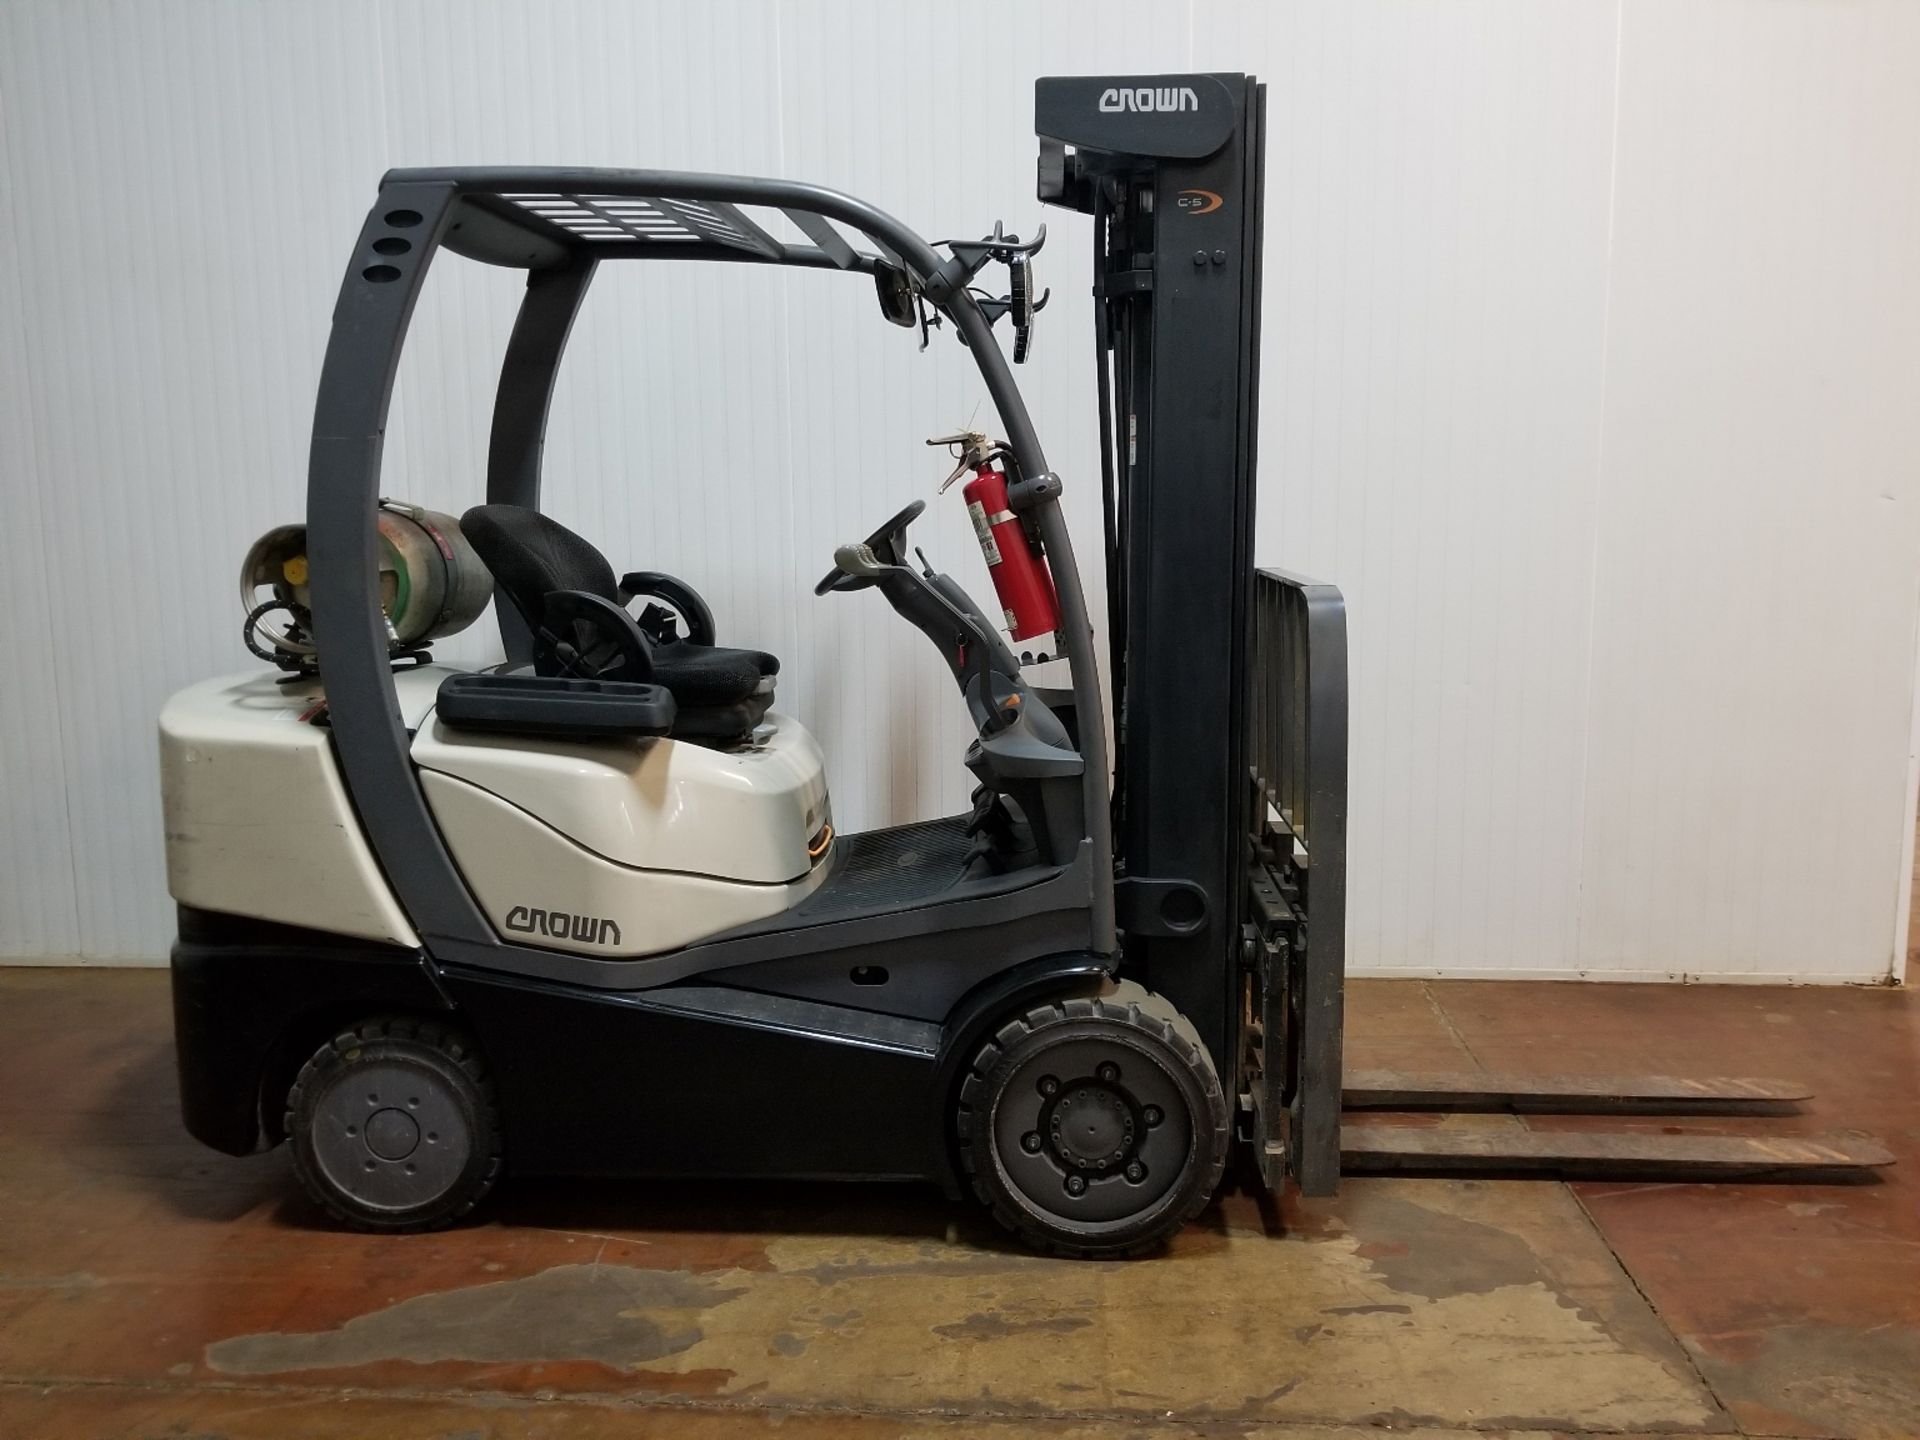 CROWN (2017) C51000-60 6,000 LB. CAPACITY LPG FORKLIFT WITH 198" MAX. LIFT HEIGHT, 3-STAGE MAST,